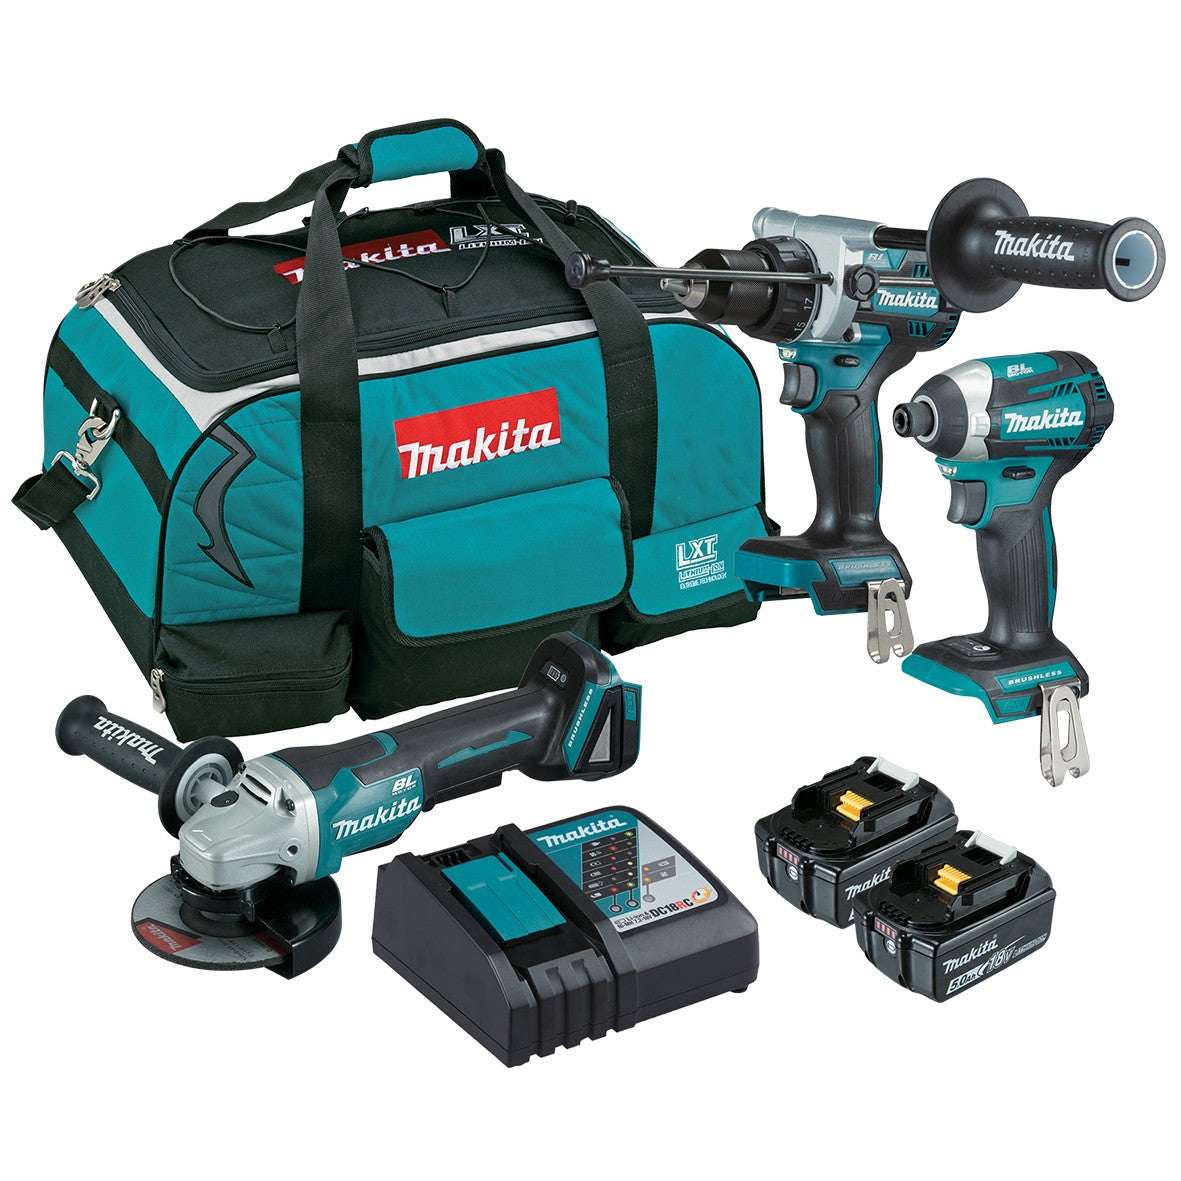 18V 5.0Ah 3Pce Brushless Hammer Driver Drill + Impact Driver + Paddle Switch Angle Grinder Kit DLX3146TX1 by Makita